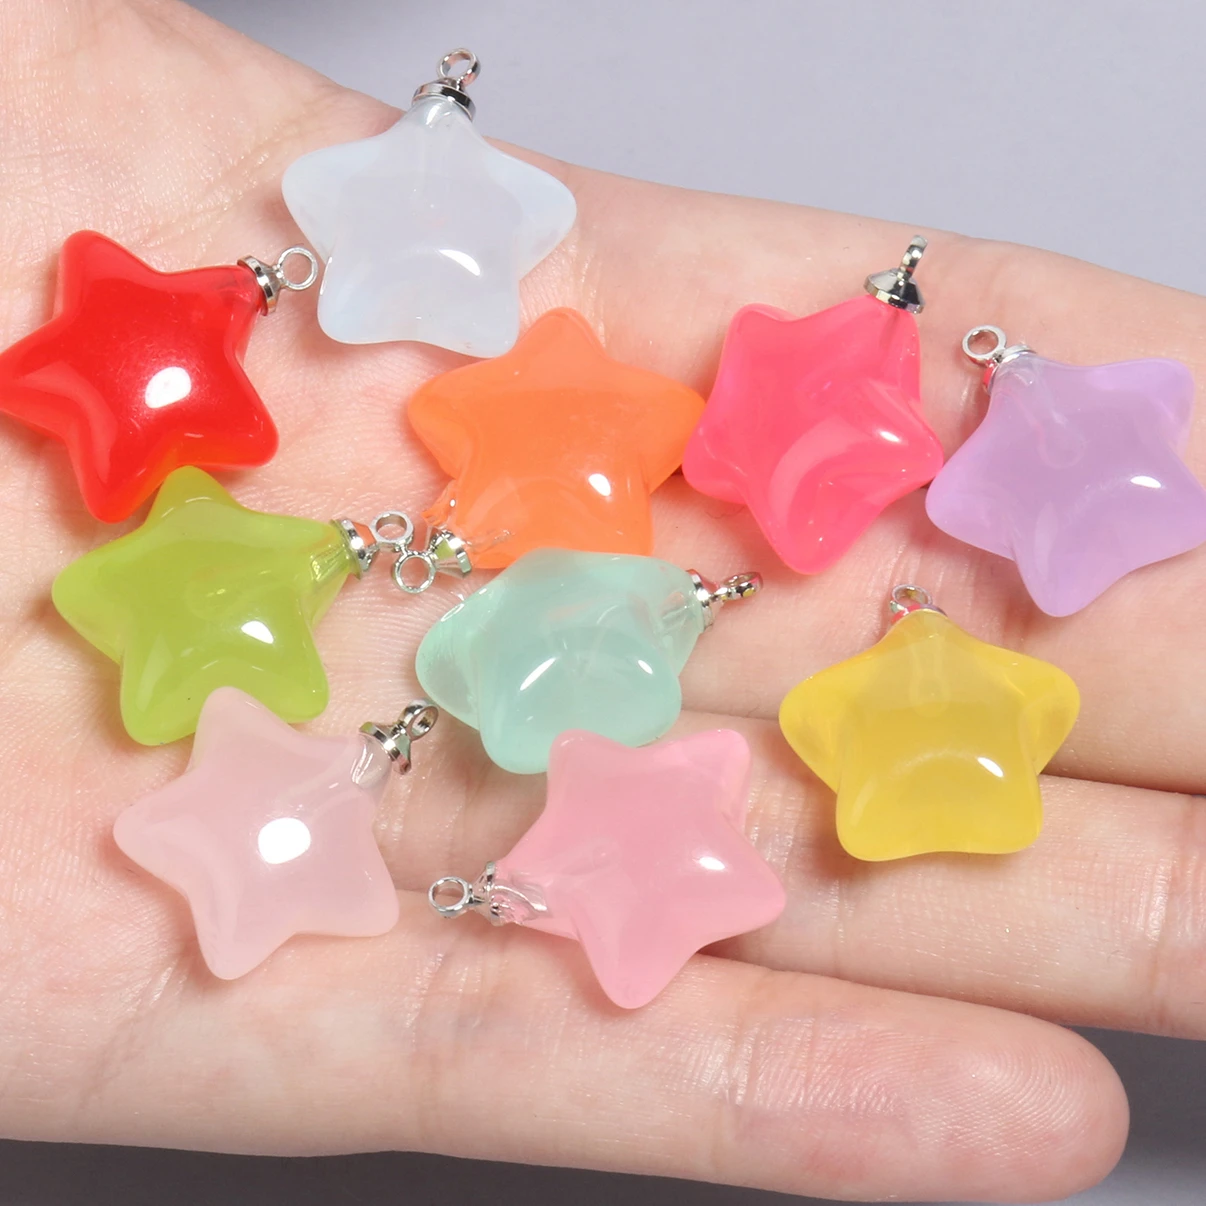 10pcs/lot Mixed Cute Resin Star charms pendants for bracelets necklace  earrings jewelry making diy Keychain parts 20x17.5mm